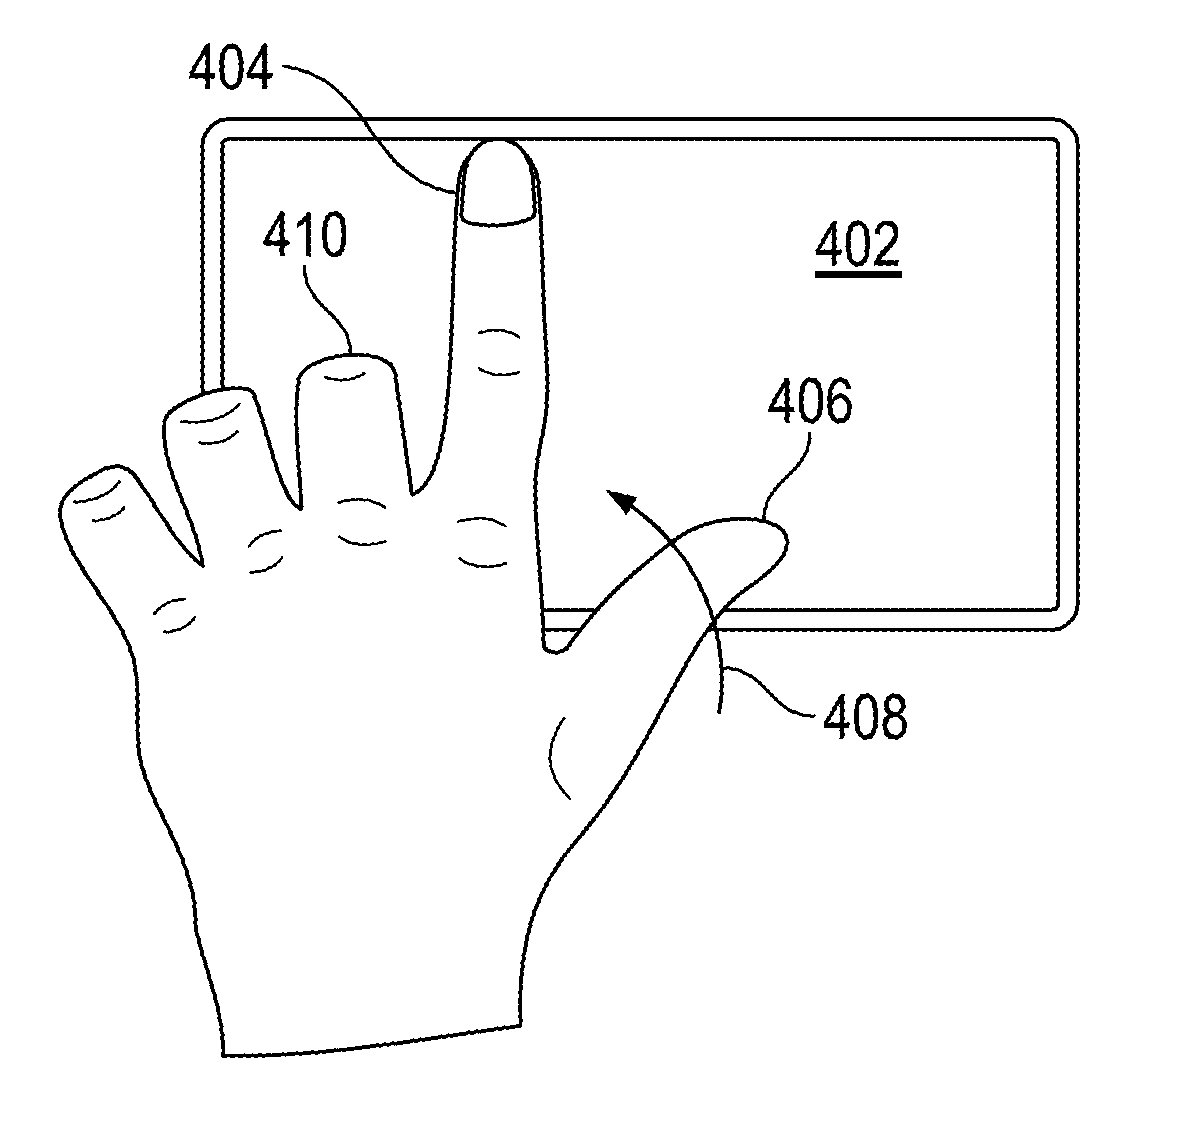 Systems and methods for dynamically modulating a user interface parameter using an input device